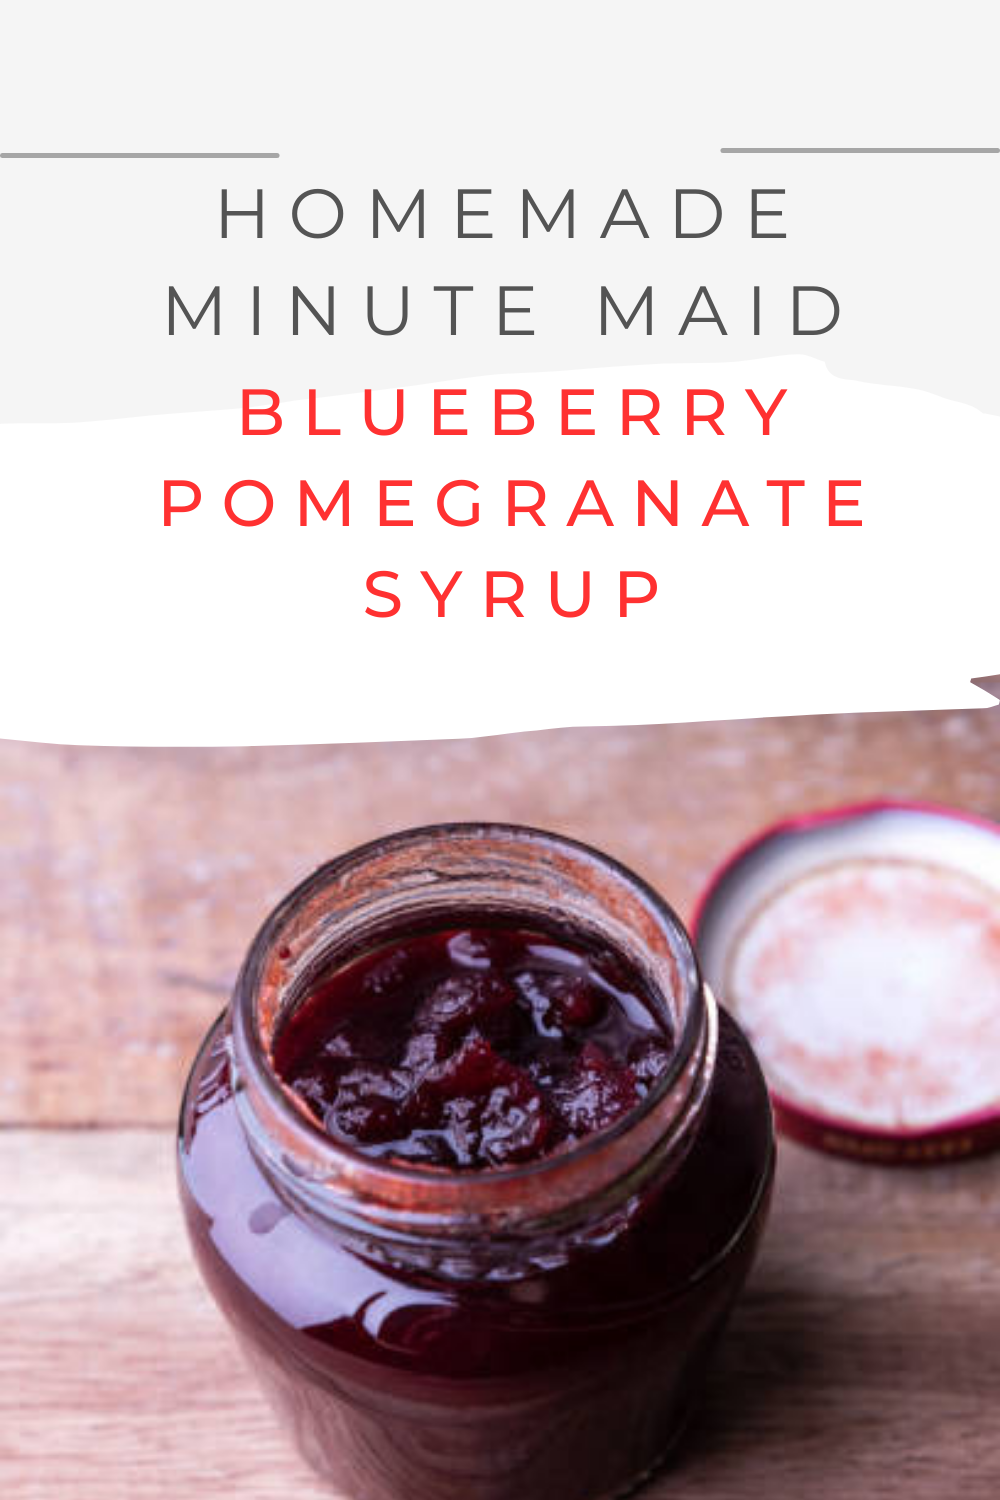 Minute Maid blueberry pomegranate syrup 